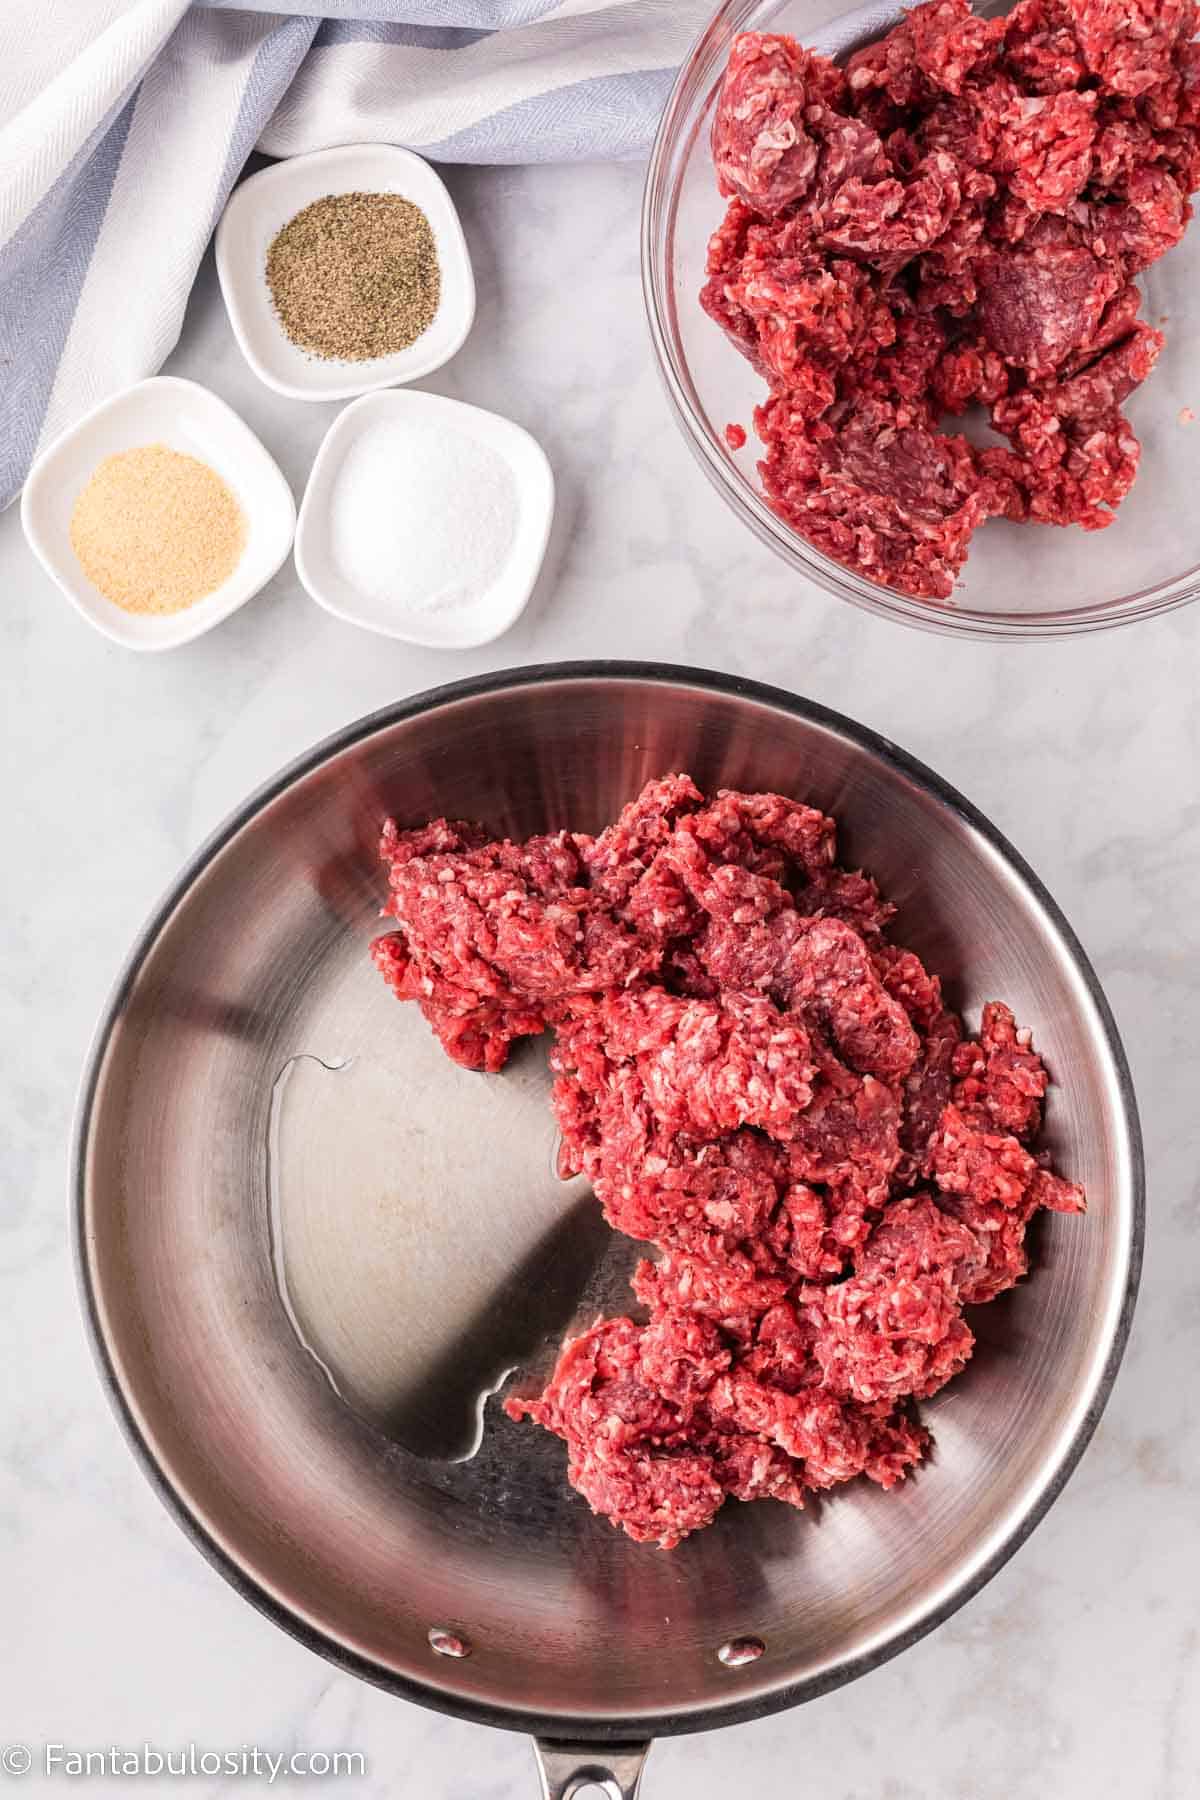 Oil and ground beef in frying pan.